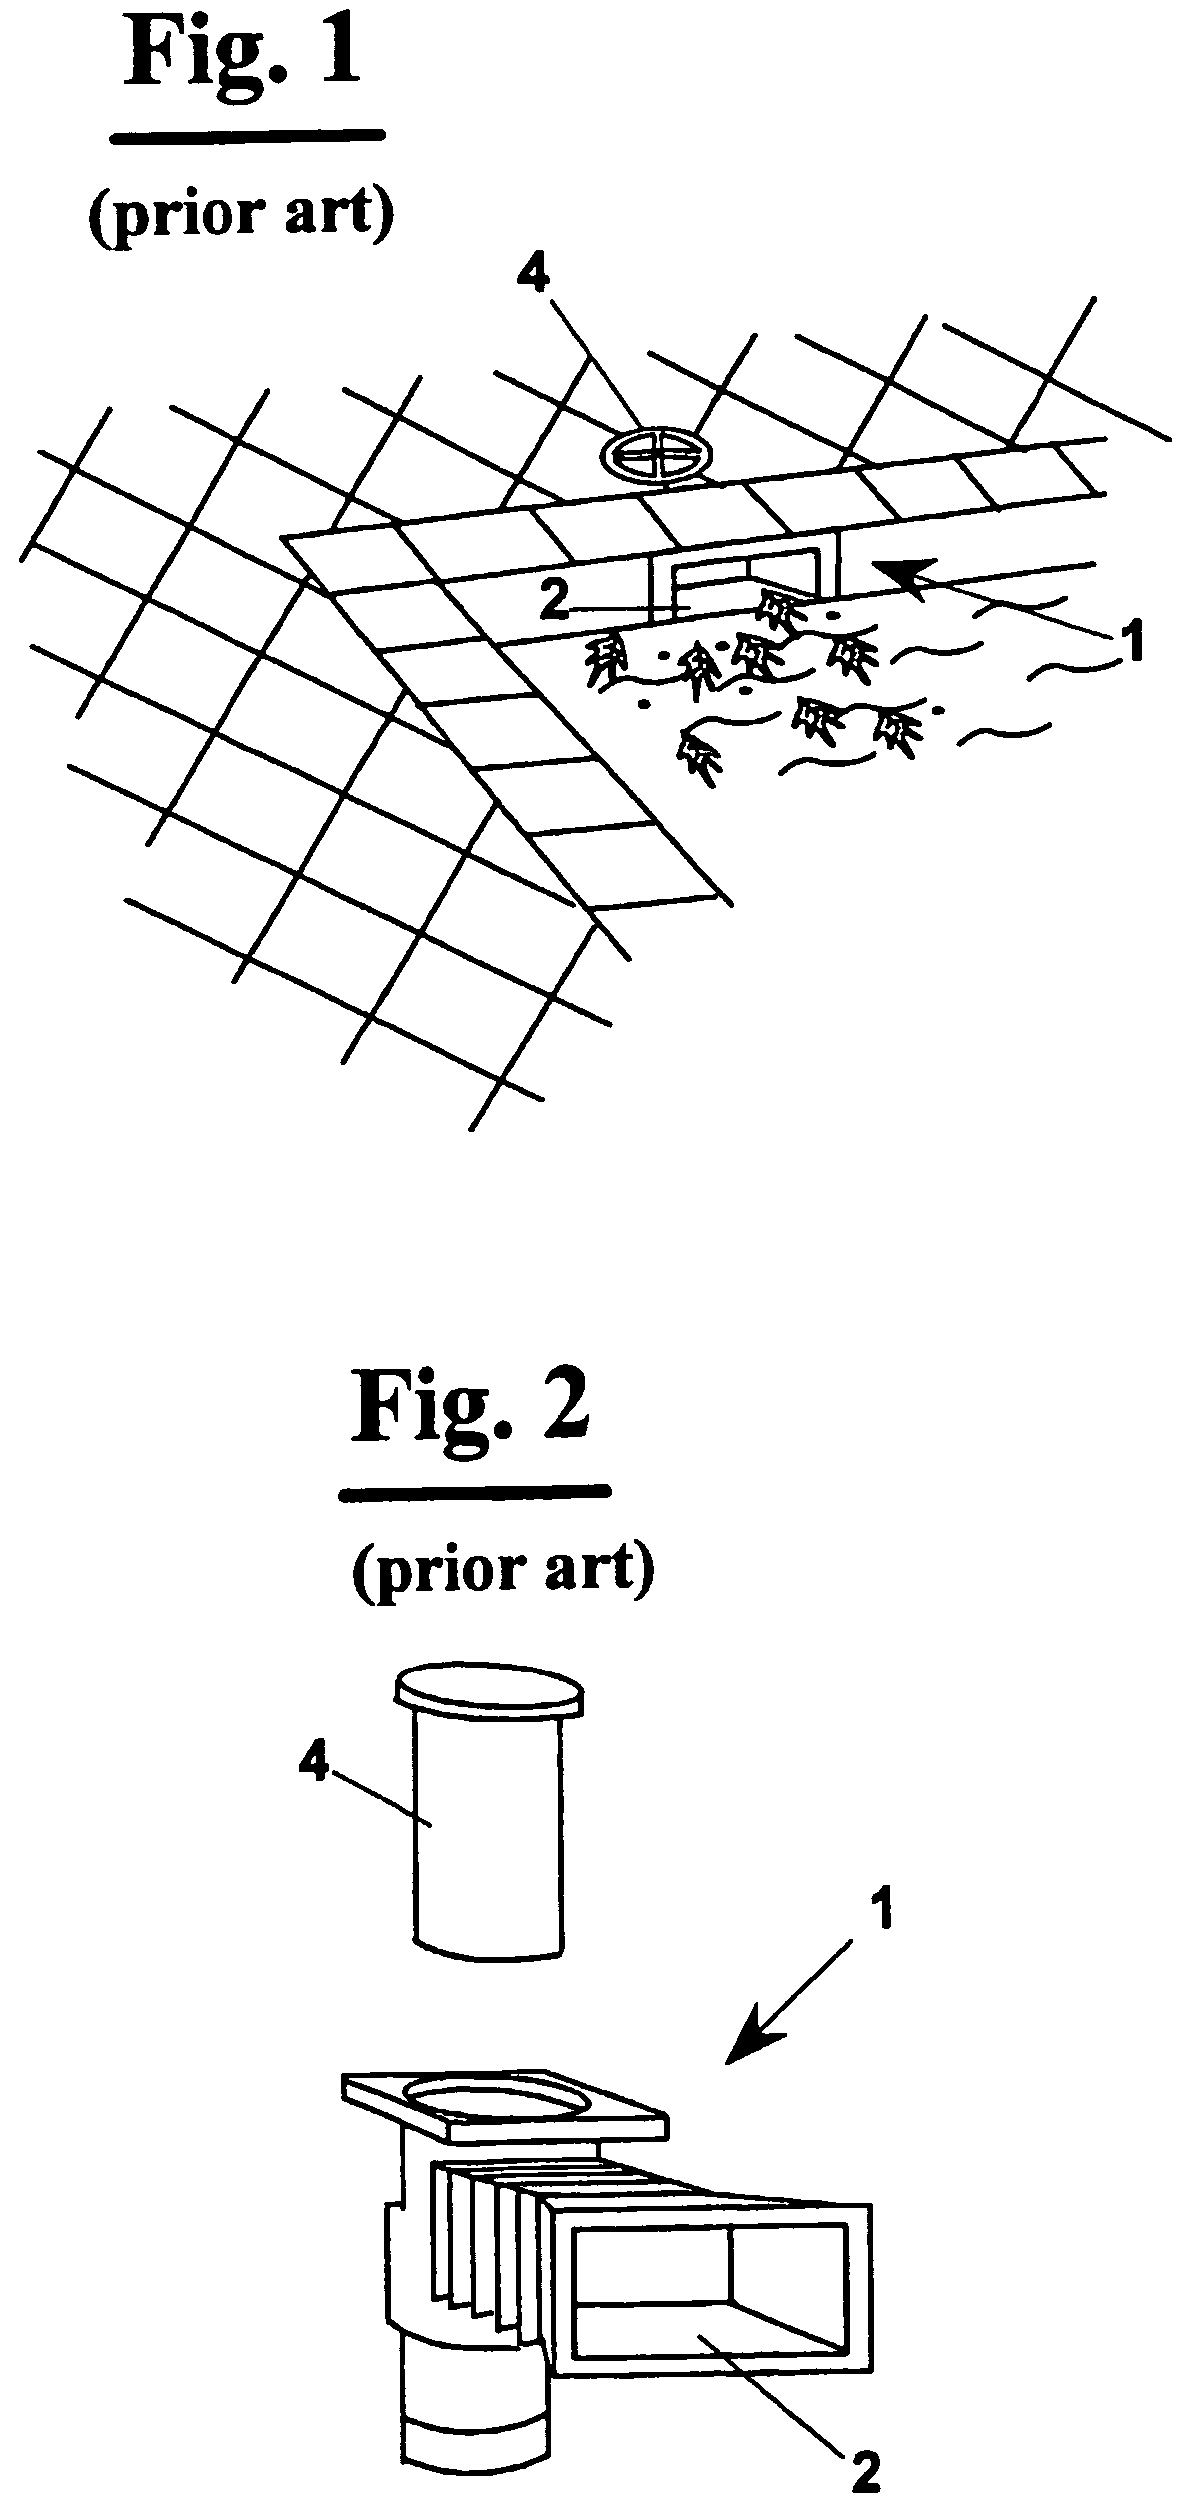 Self-propelled floating device for cleaning water surfaces